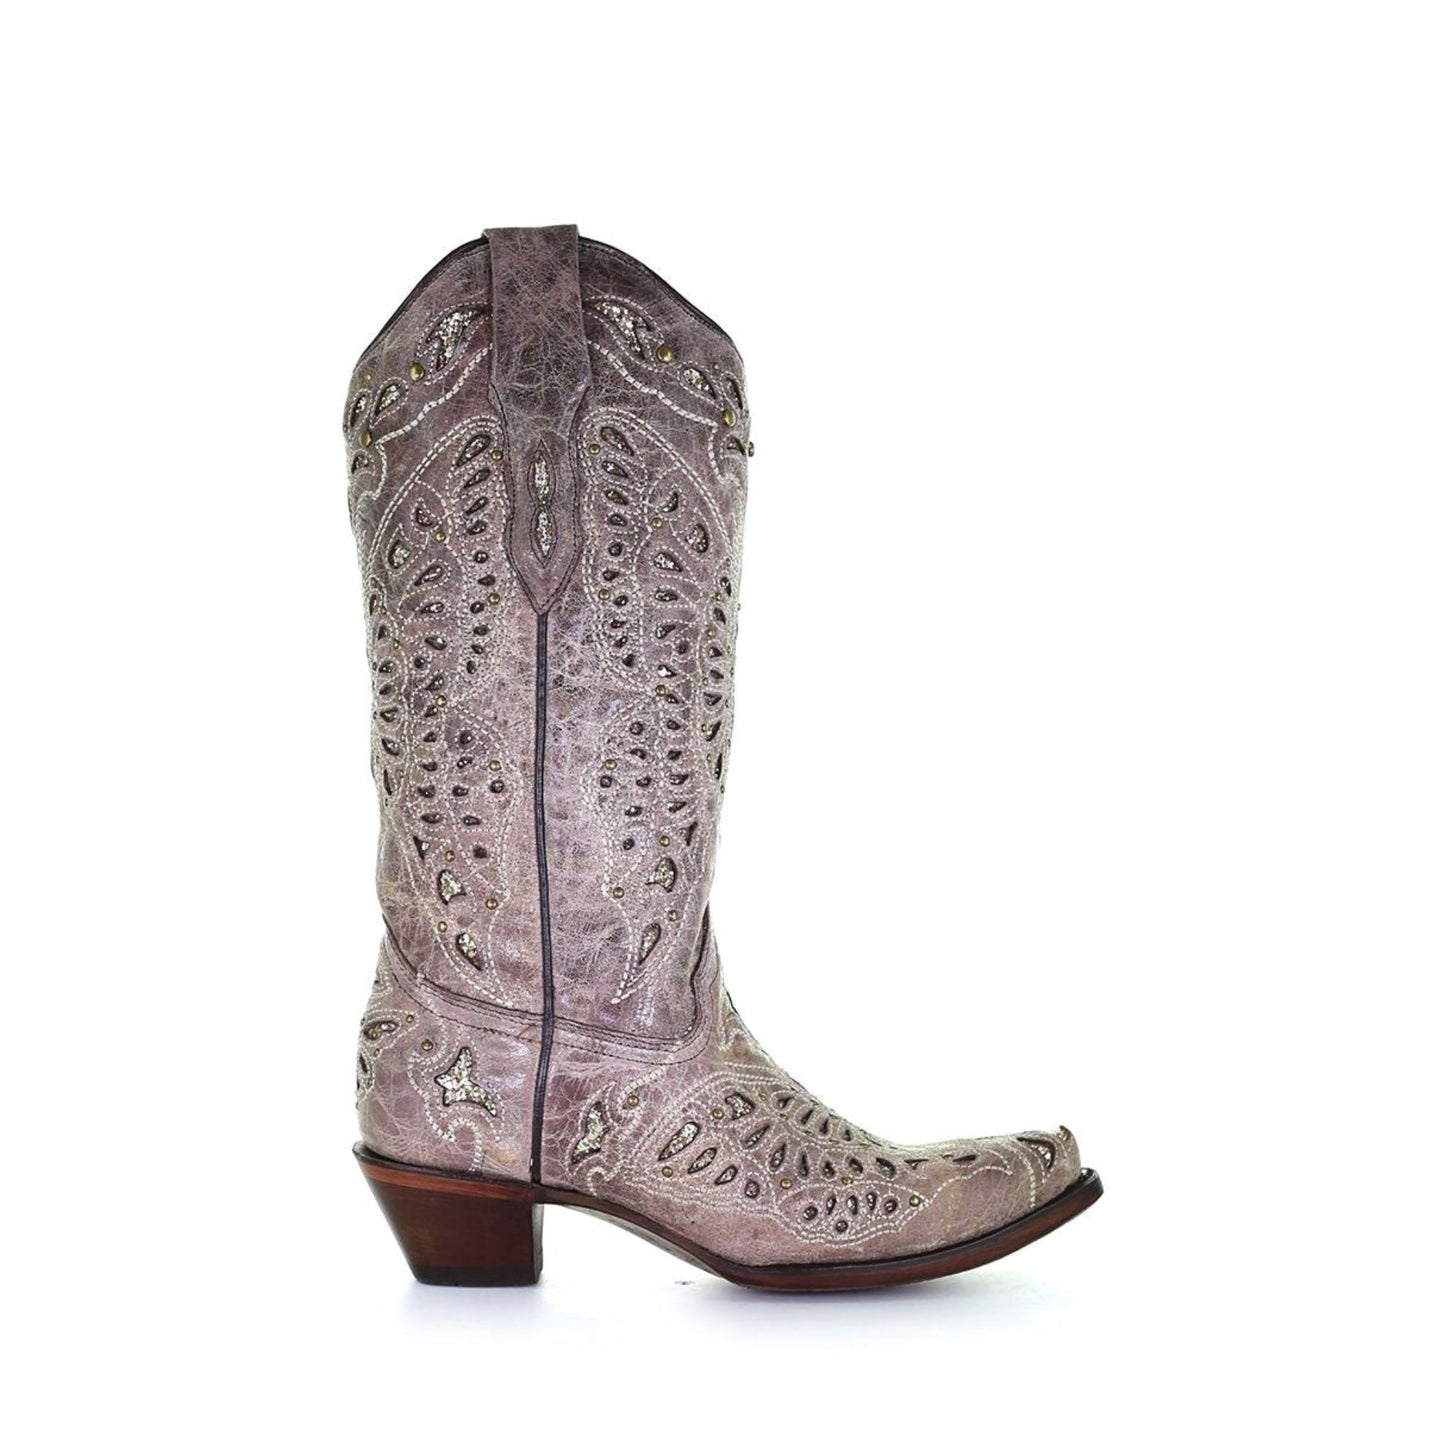 A4088 - Corral brown western cowgirl leather boots for women-BOOTS-kuet